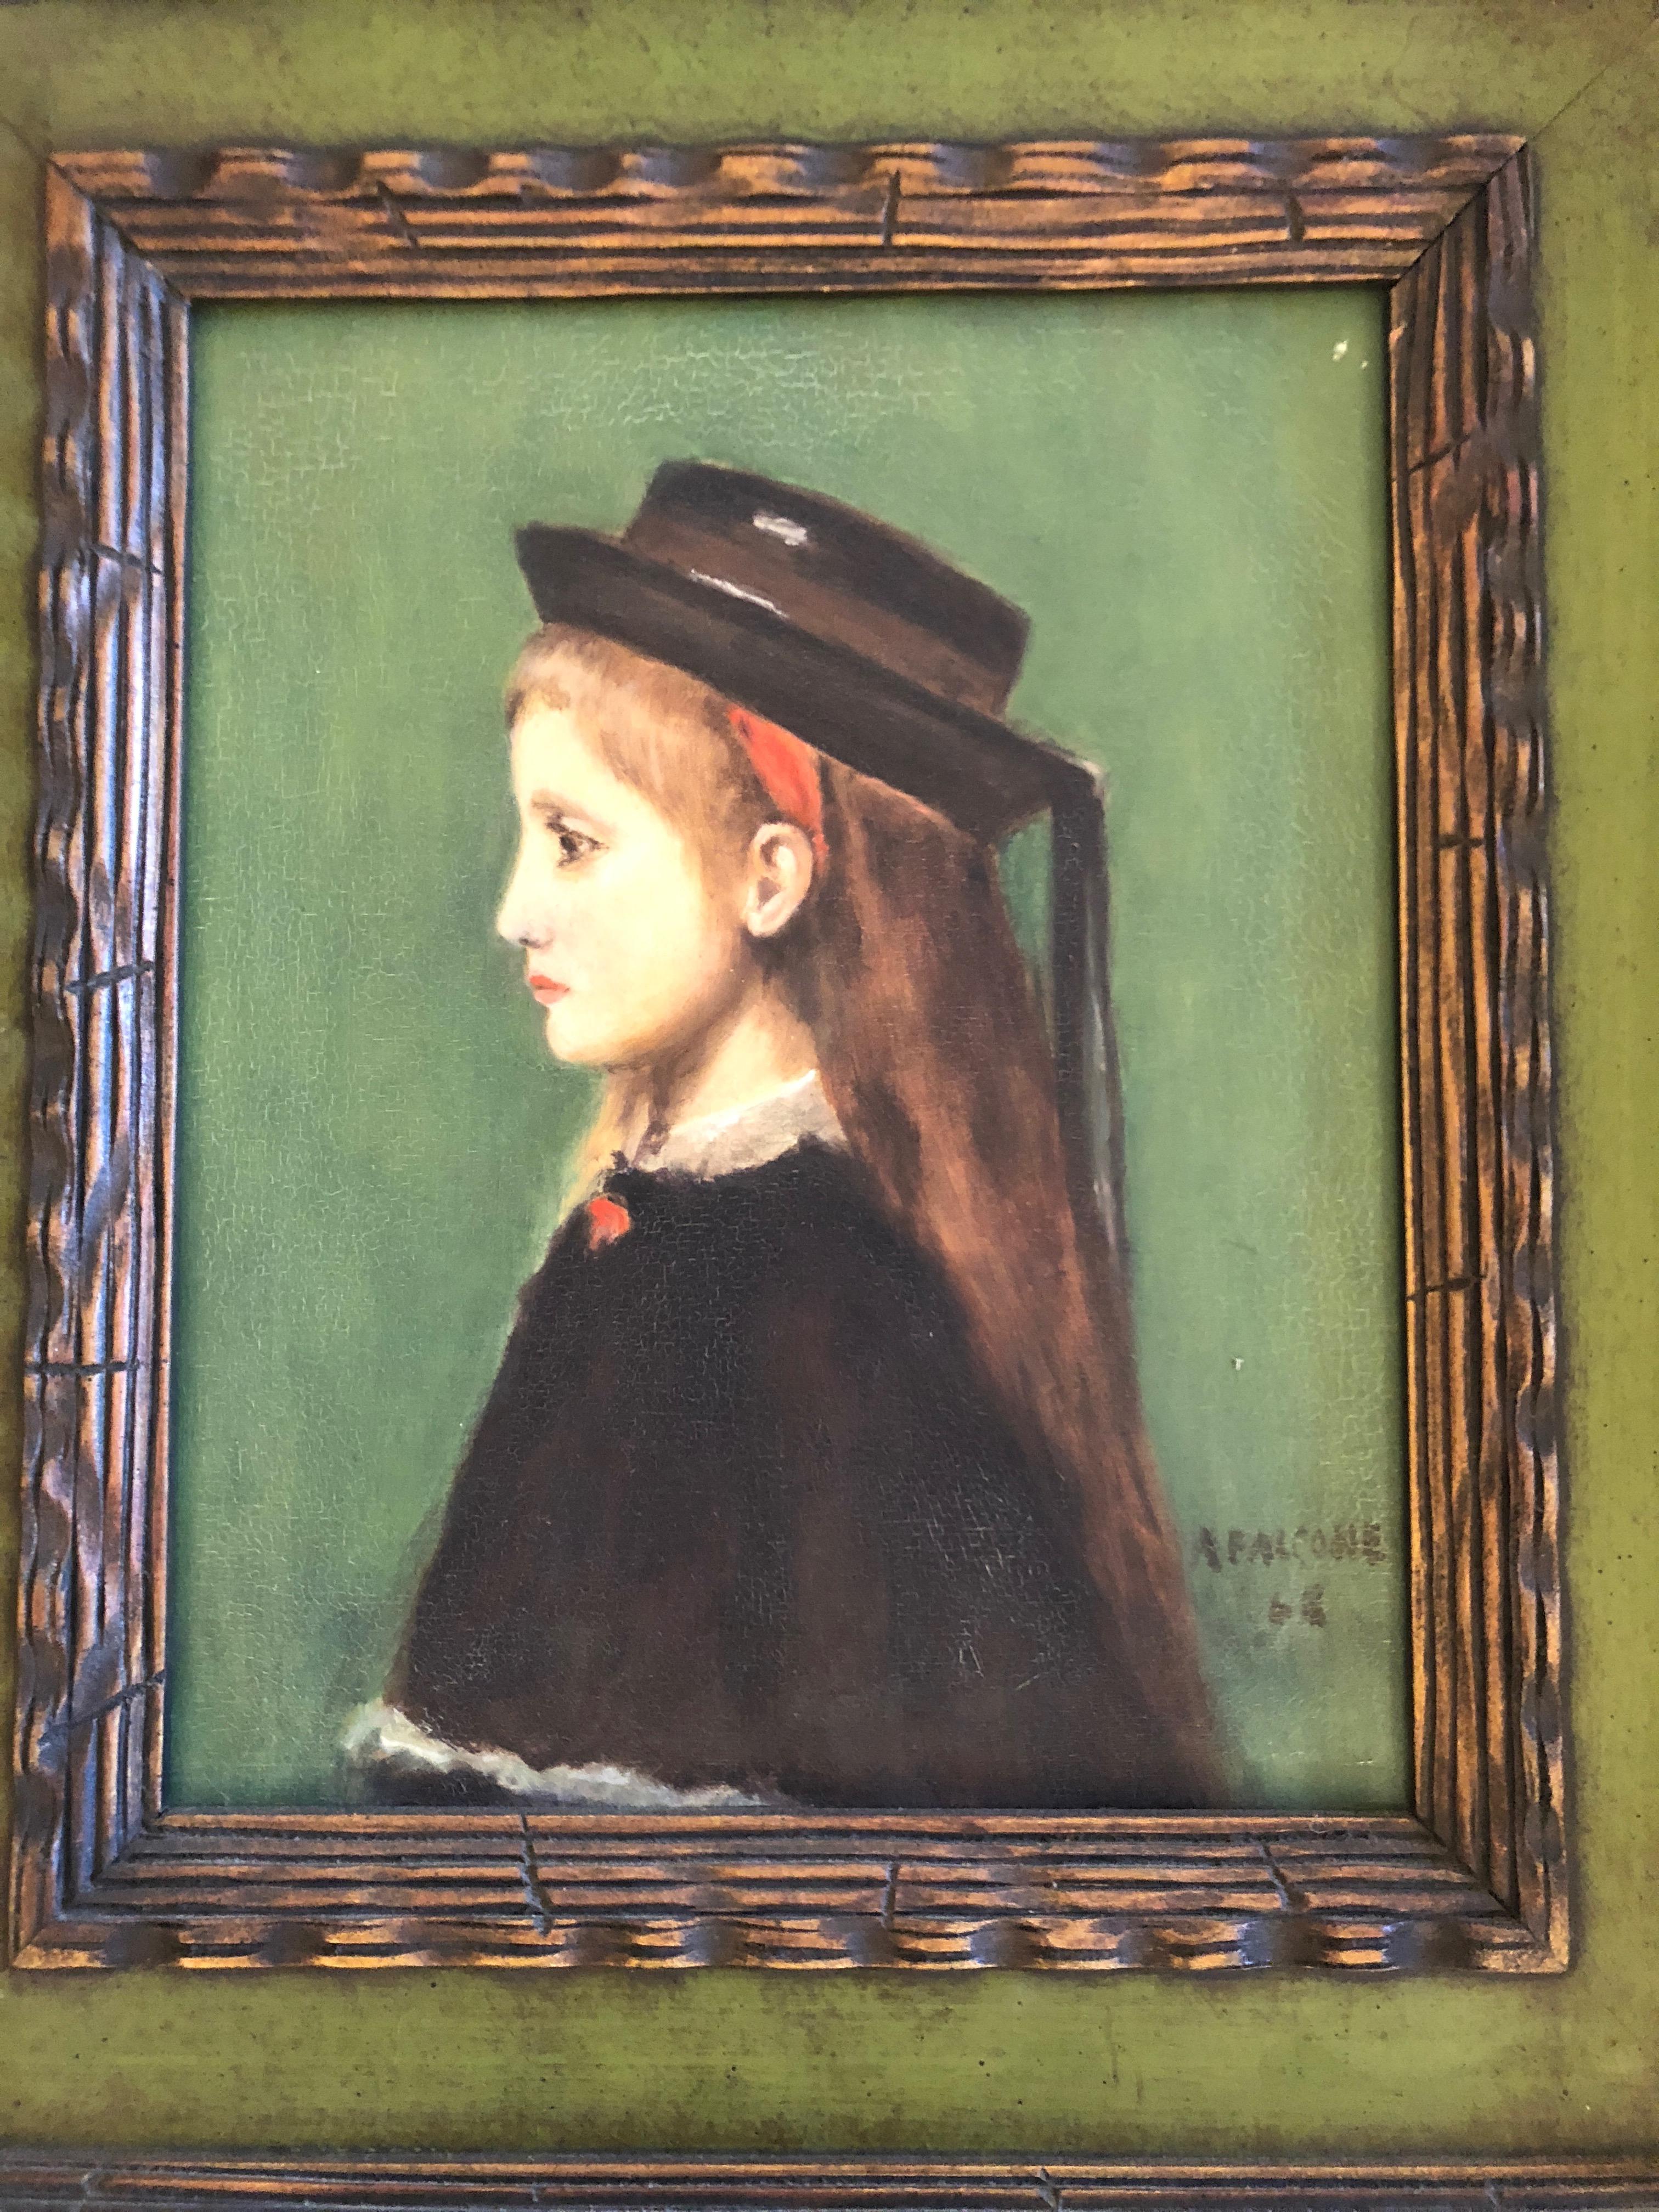 Charming portrait of a redheaded girl wearing a hat against a green background. Signed A Falcore '69. Handsome custom frame within frame and green mat.